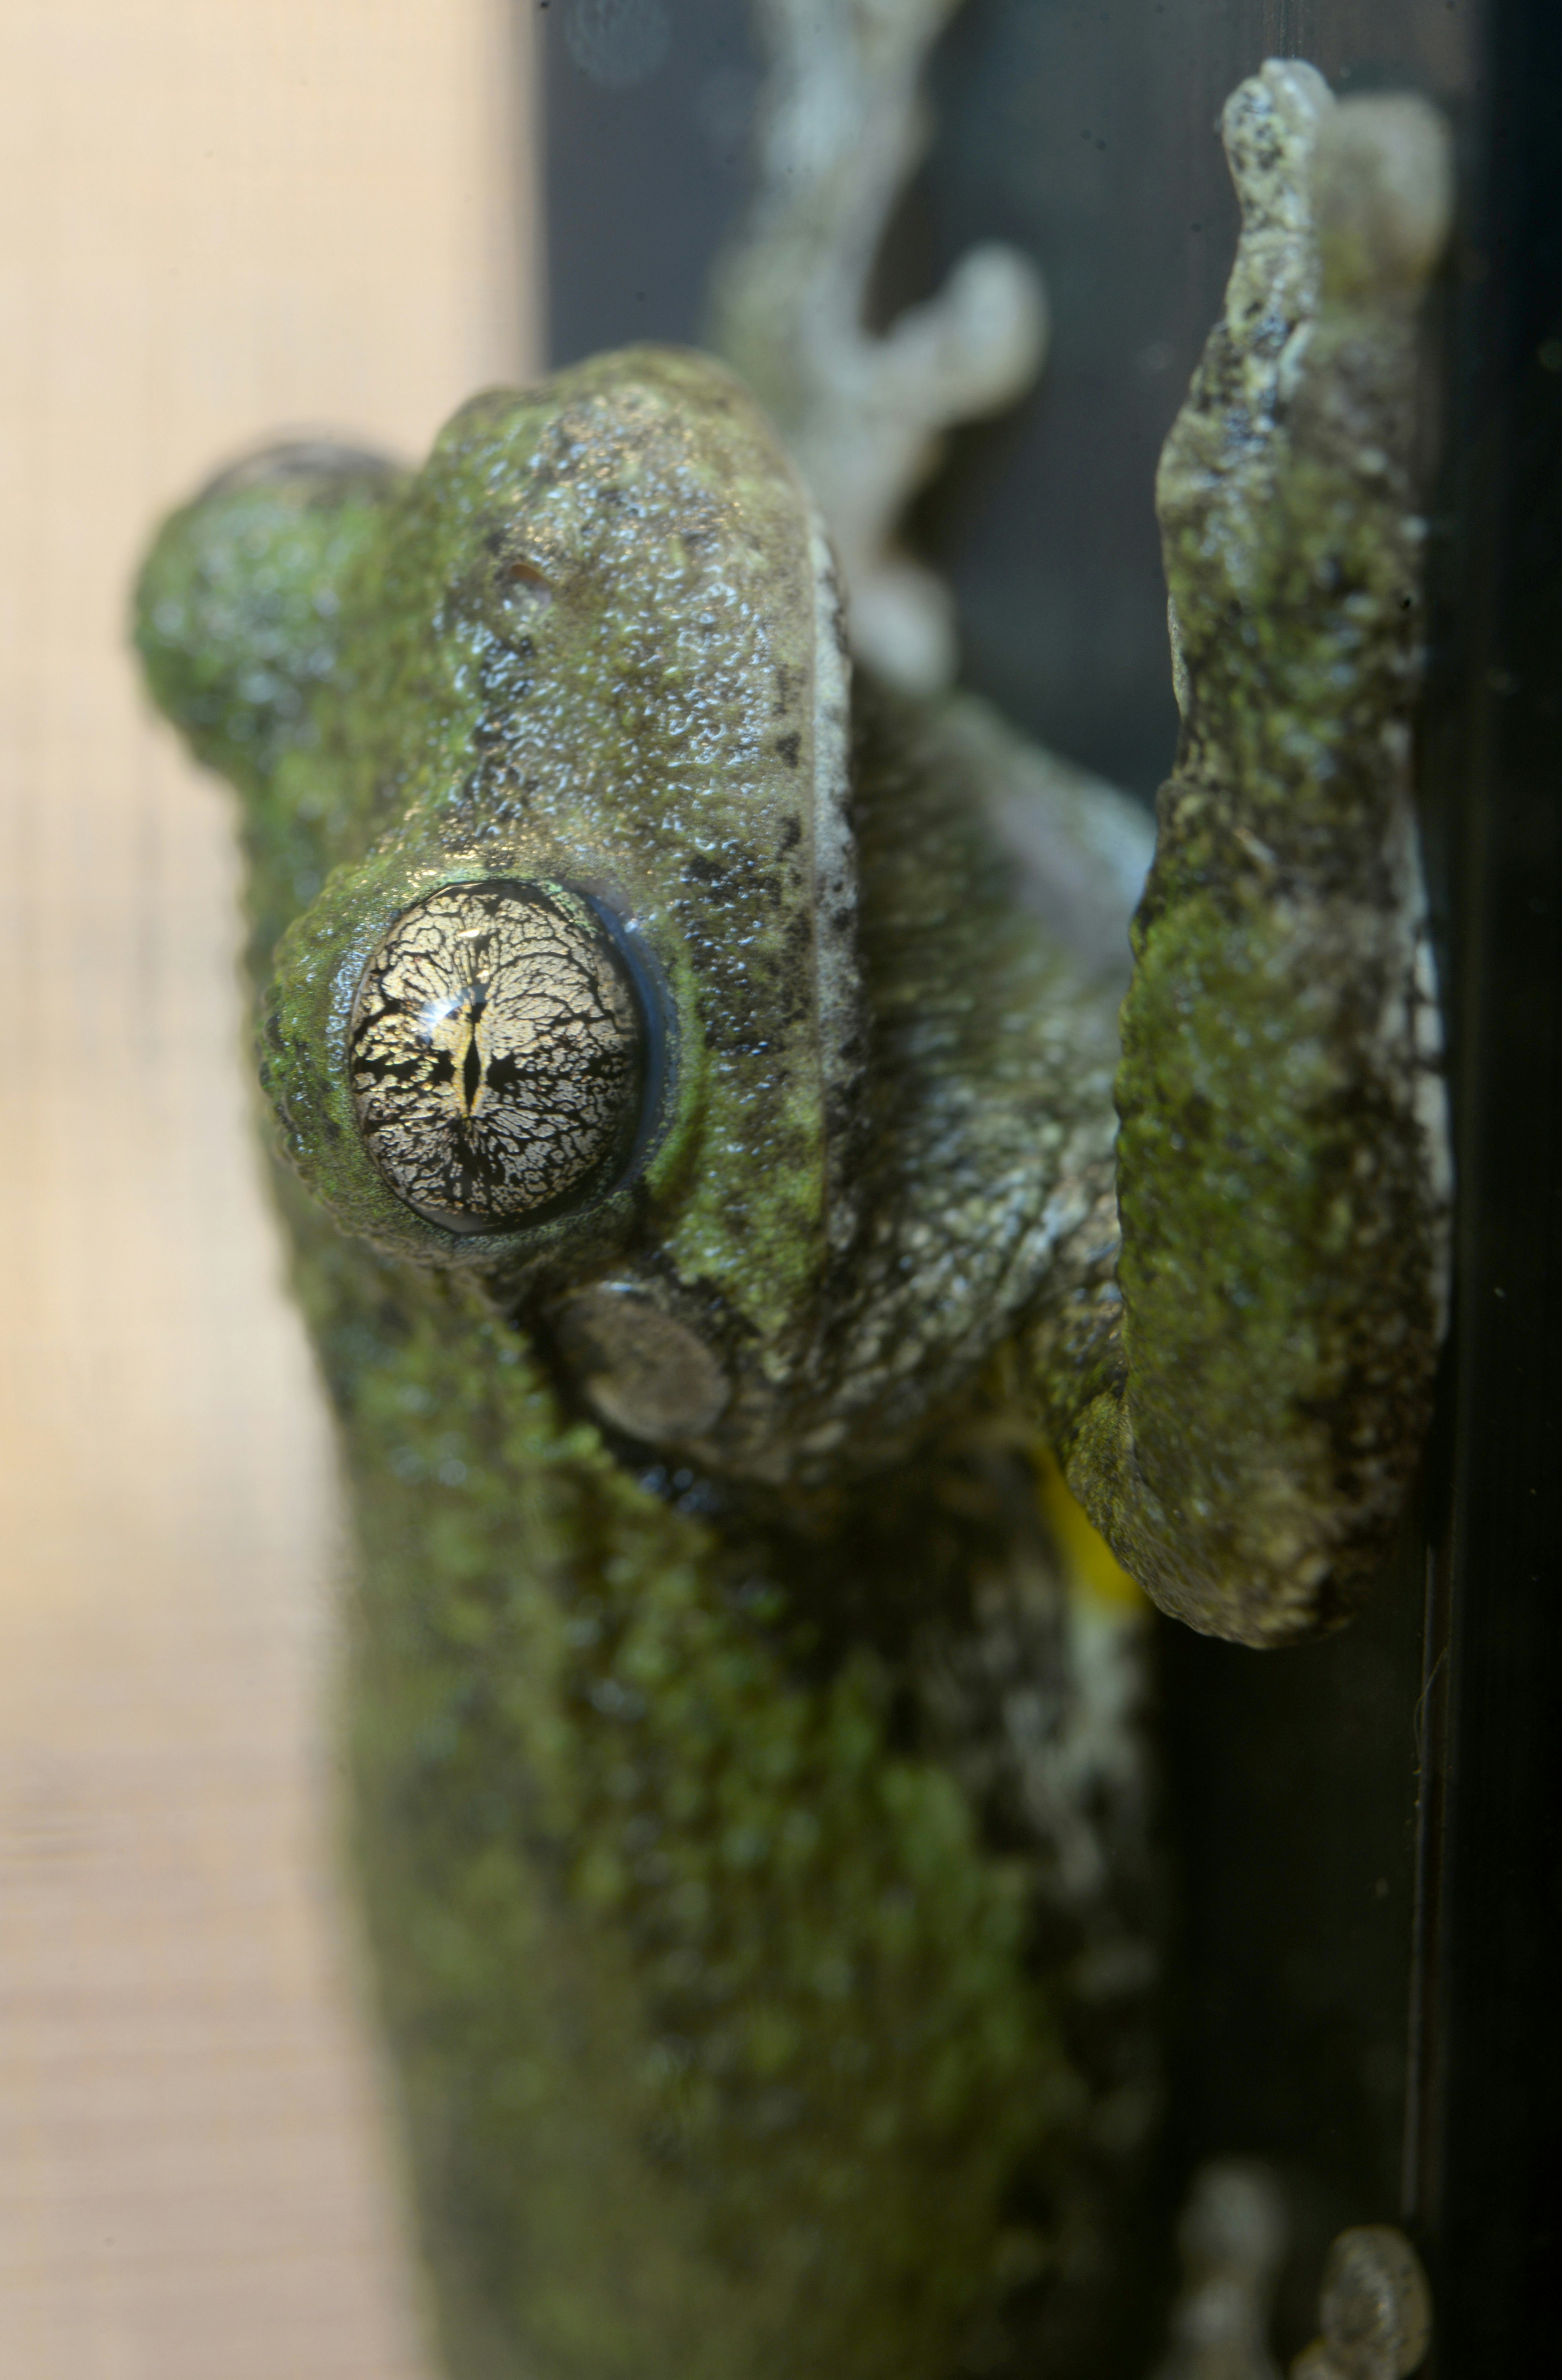 The gray tree frog is native to much of North America and southeastern Canada. They have a remarkable ability to camouflage, changing in color from bright green to dark brown to pale tan. During a winter freeze, the gray tree frog will freeze to the point his heart and lungs will stop. The frog survives by producing large amounts of glycerol, which changes to glucose, spreads to the cells, and prevents them from dehydrating during the freezing process. There are only 5 known species of frog with this ability in North America. 